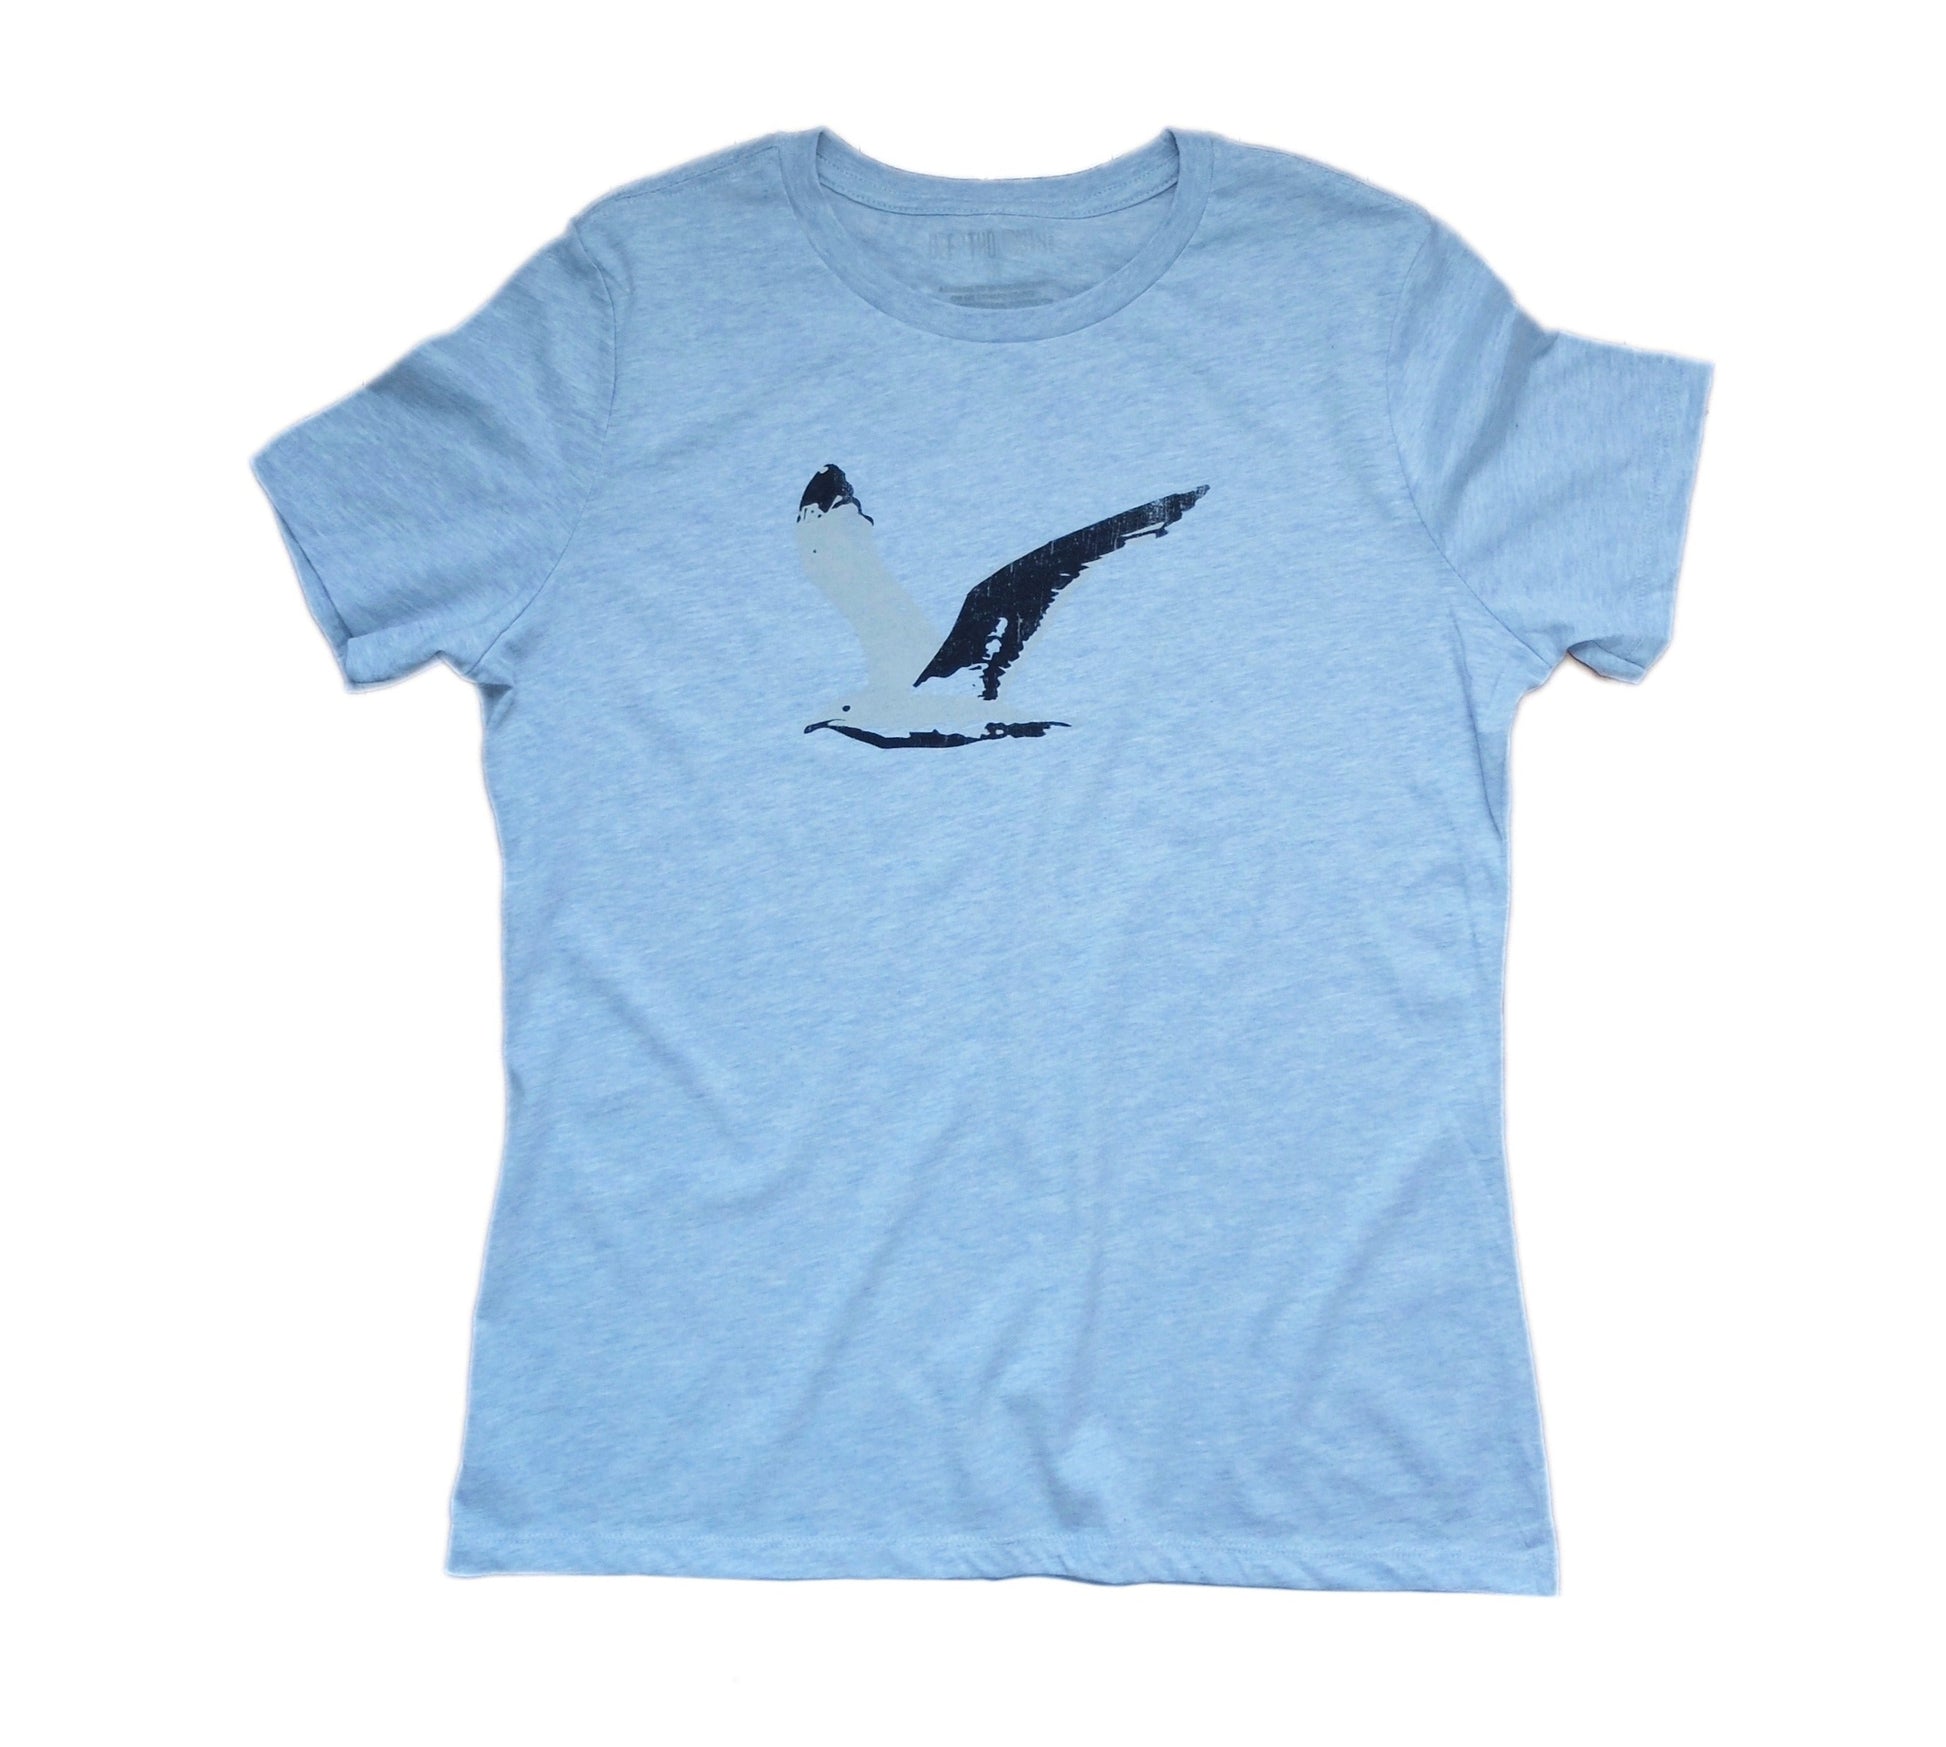 women's heather ice blue t-shirt with black and white flying seagull graphic